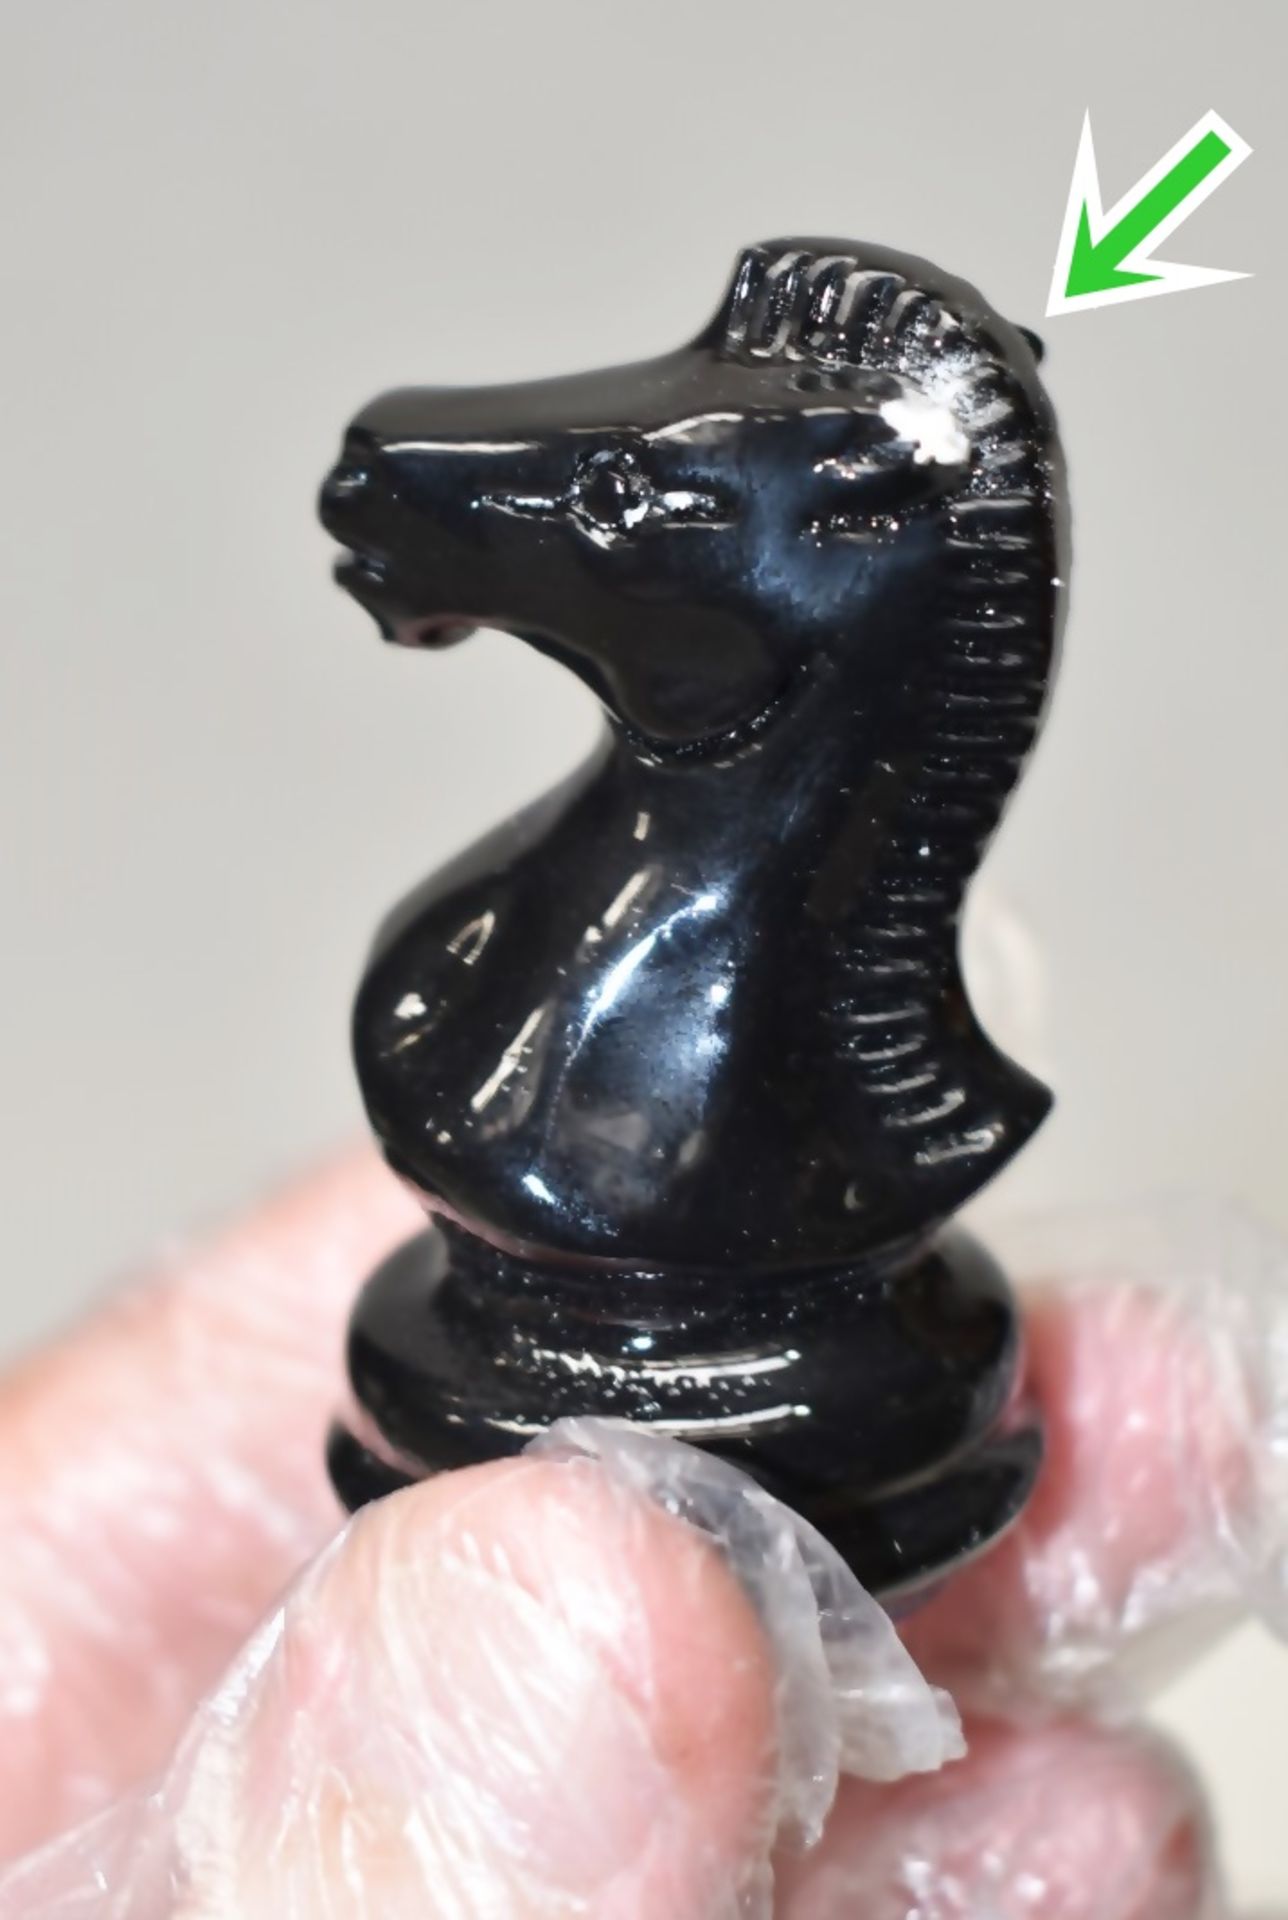 1 x PURLING Luxury Italian Chess Set In Black And White Alabaster Stone - Original Price £950.00 * - Image 12 of 15